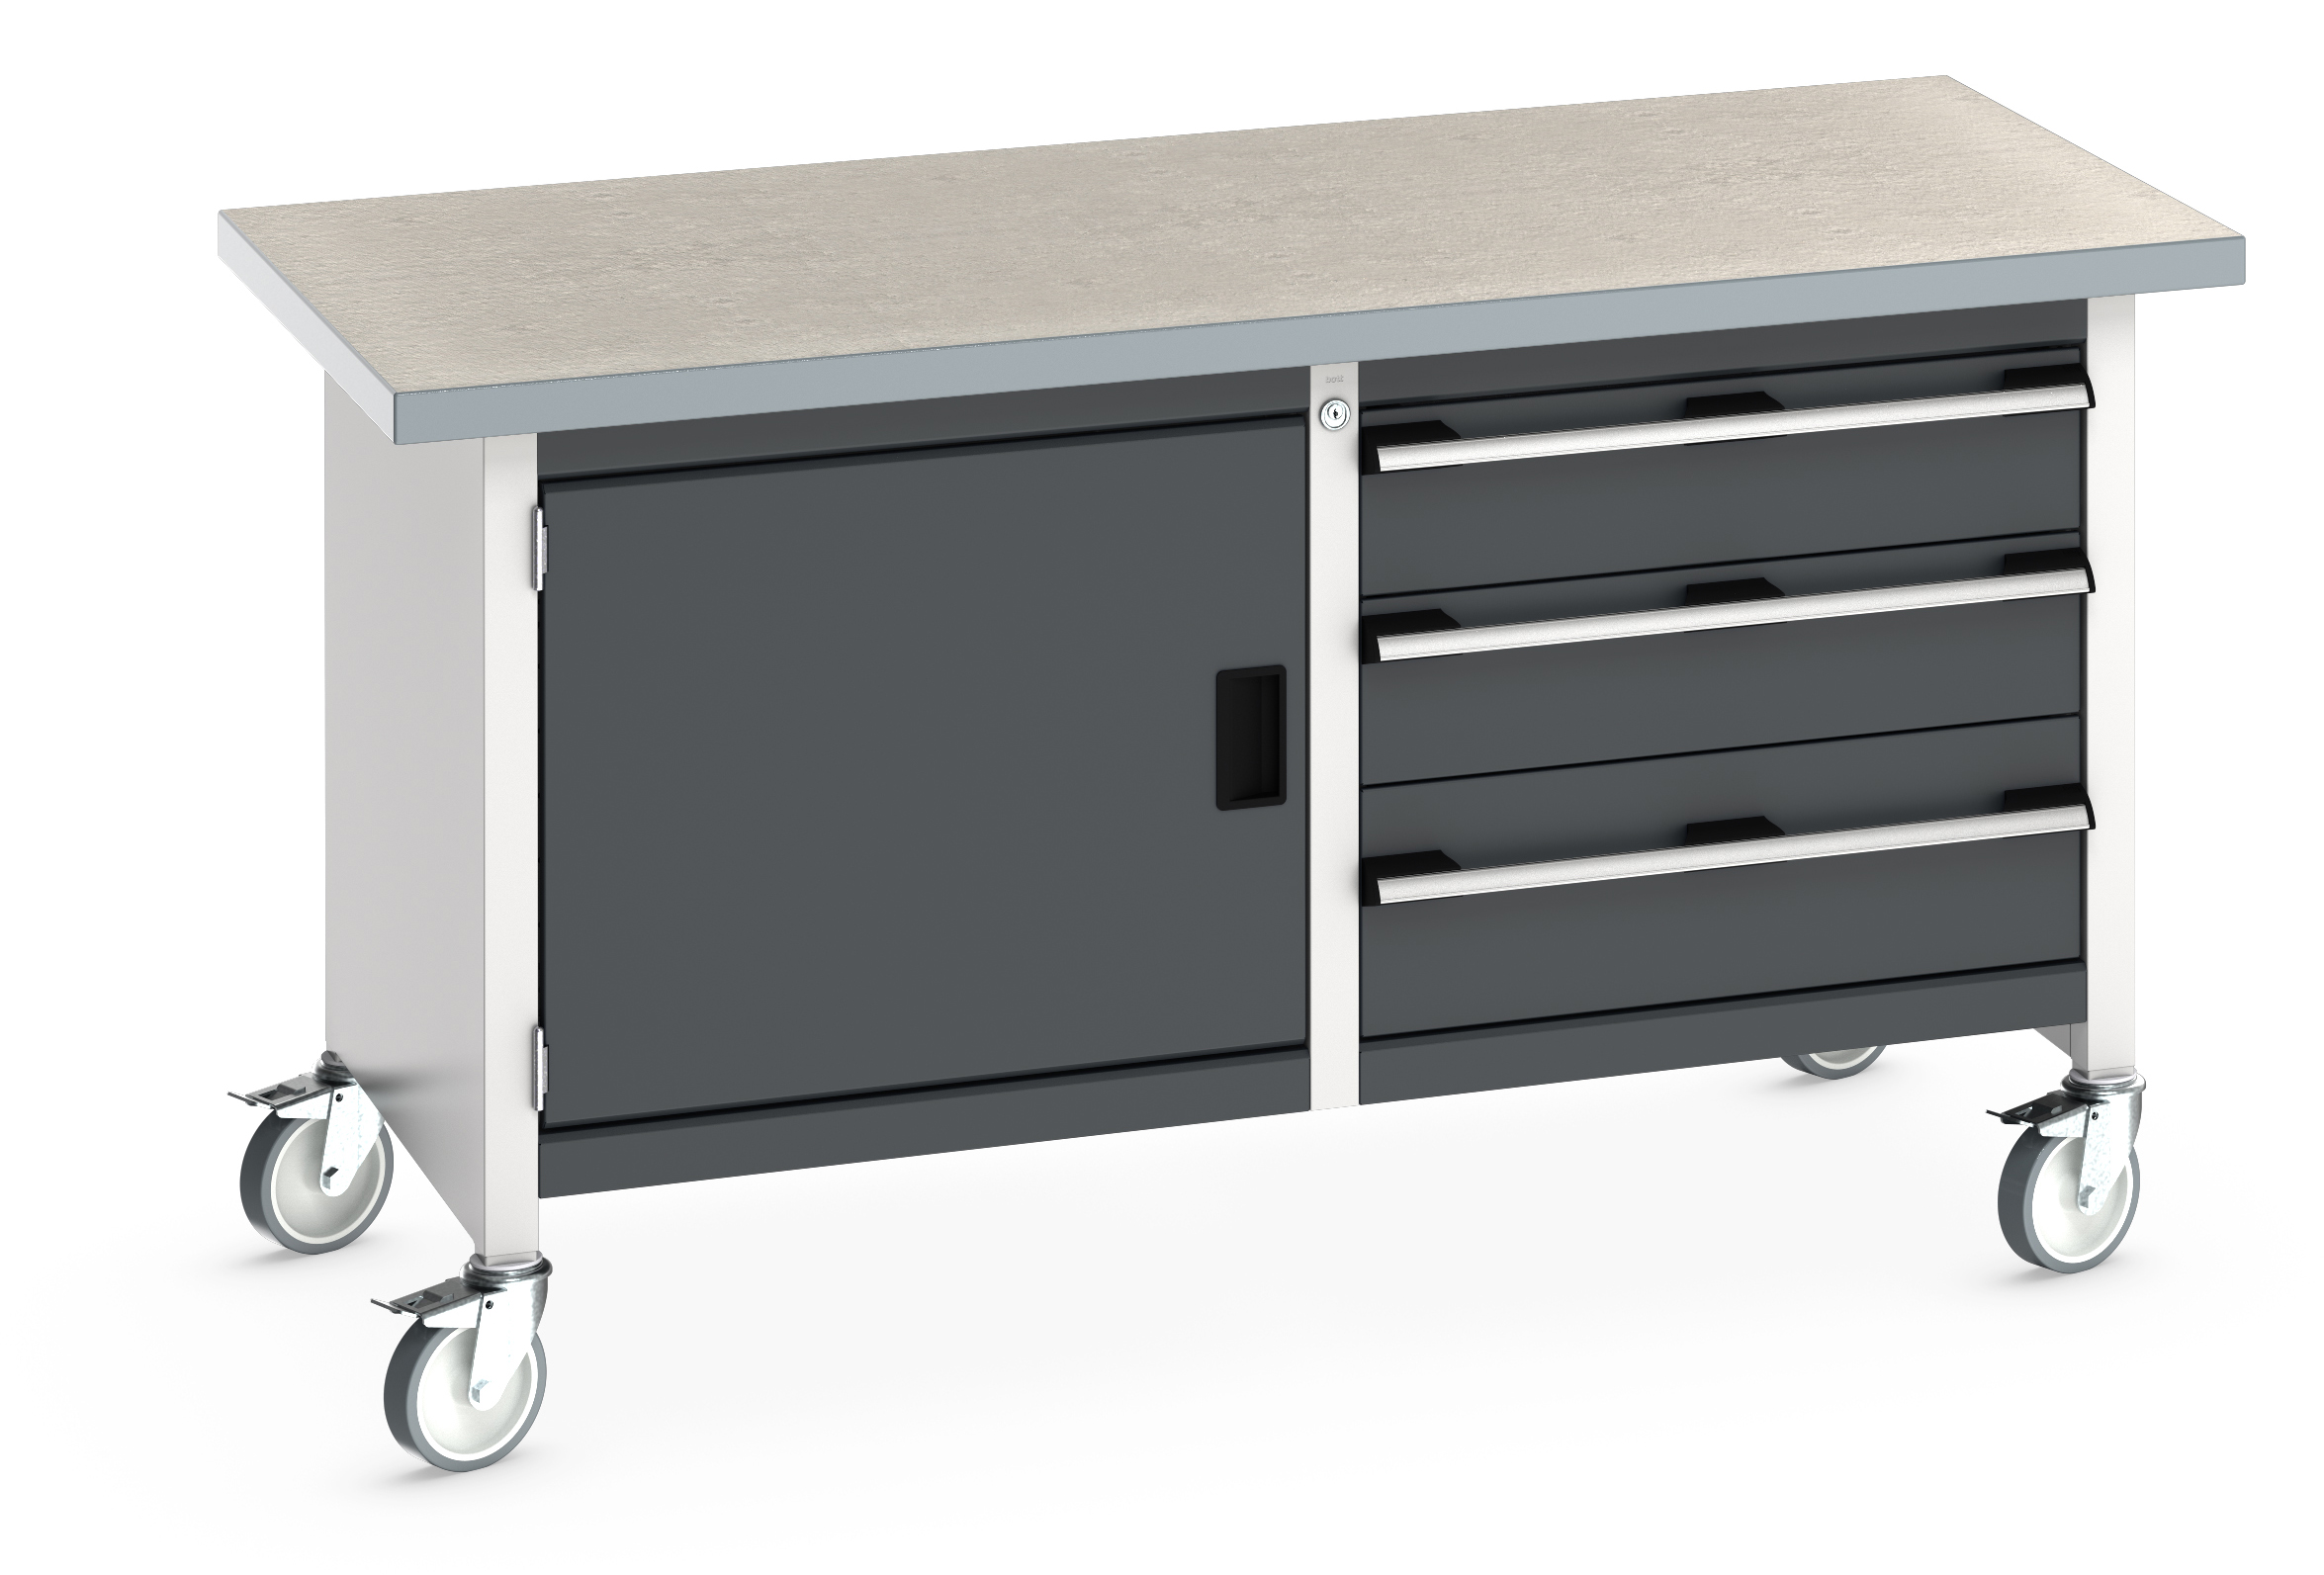 Bott Cubio Mobile Storage Bench With Full Cupboard / 3 Drawer Cabinet - 41002102.19V